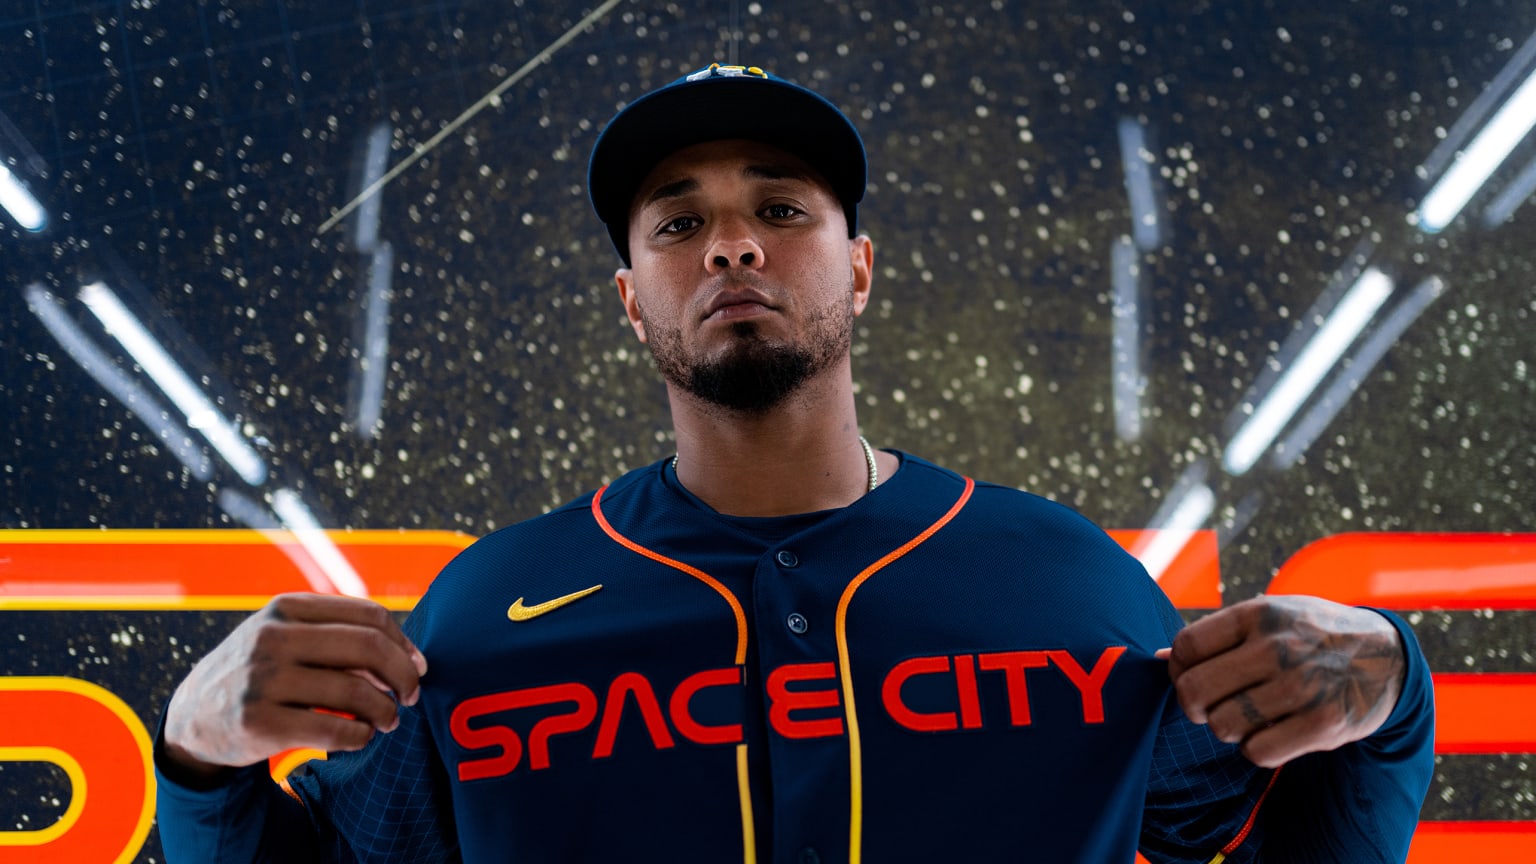 nike space city